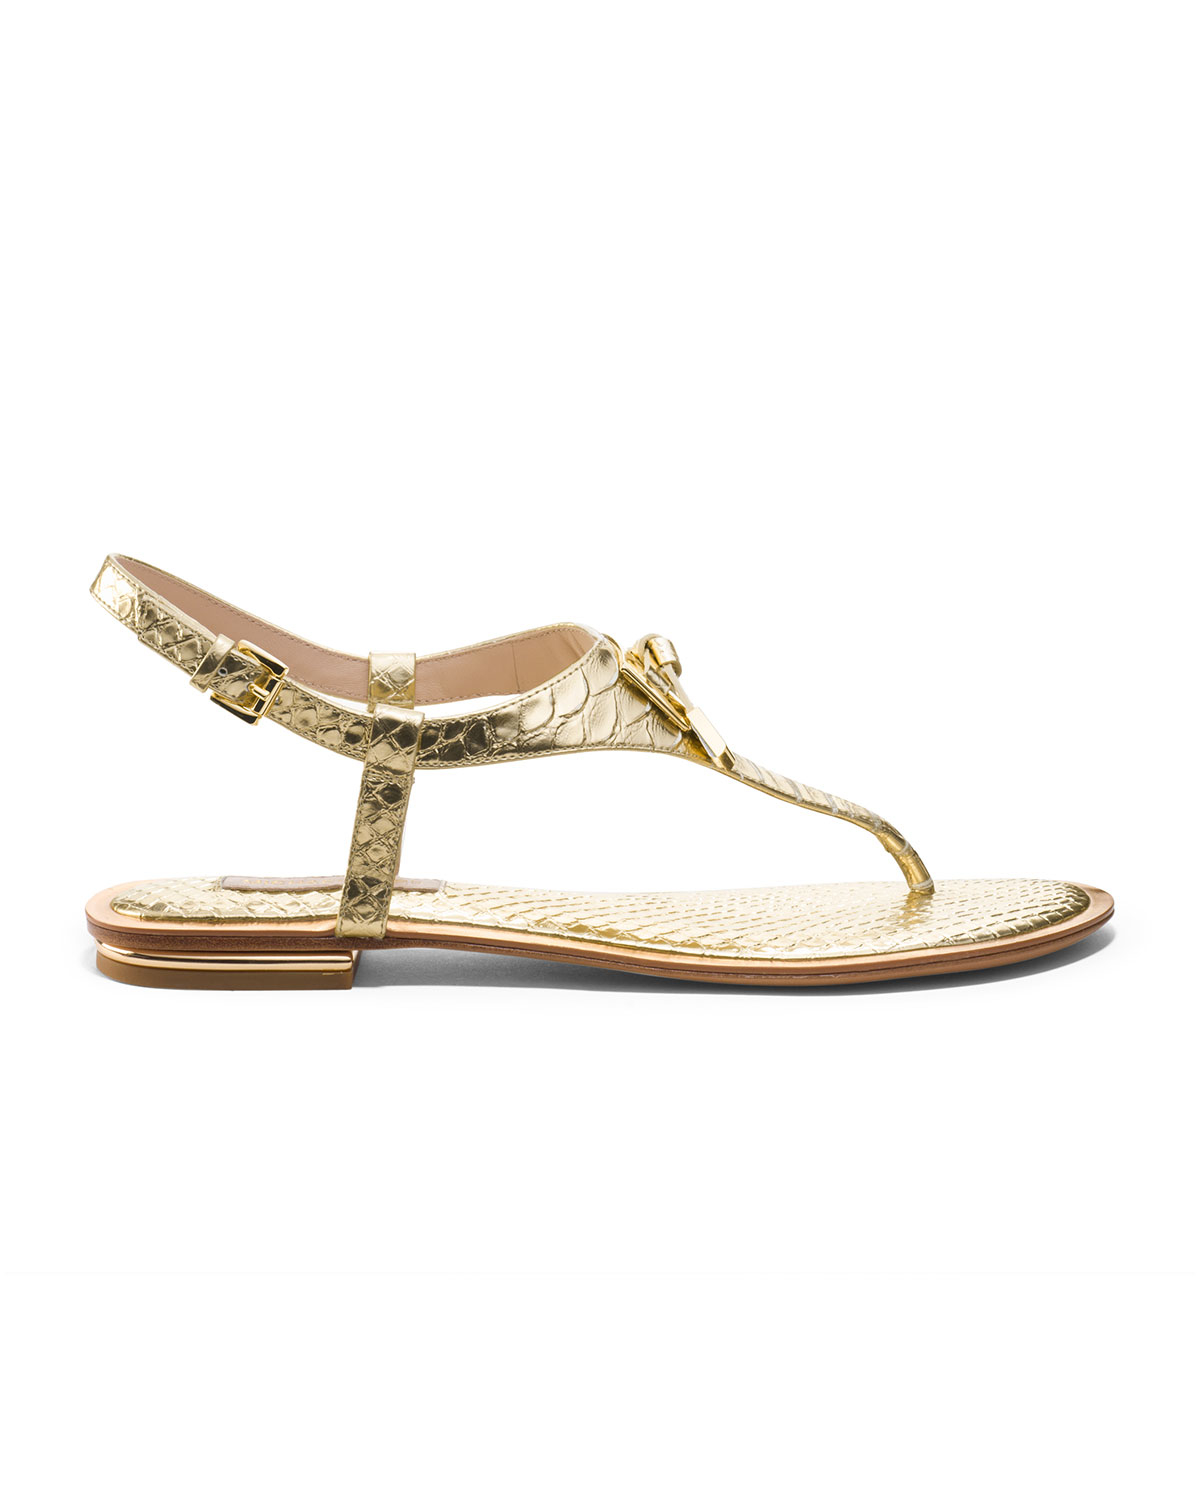 Michael Kors Hara Bowdetail Thong Sandal in Gold (PALE GOLD) | Lyst